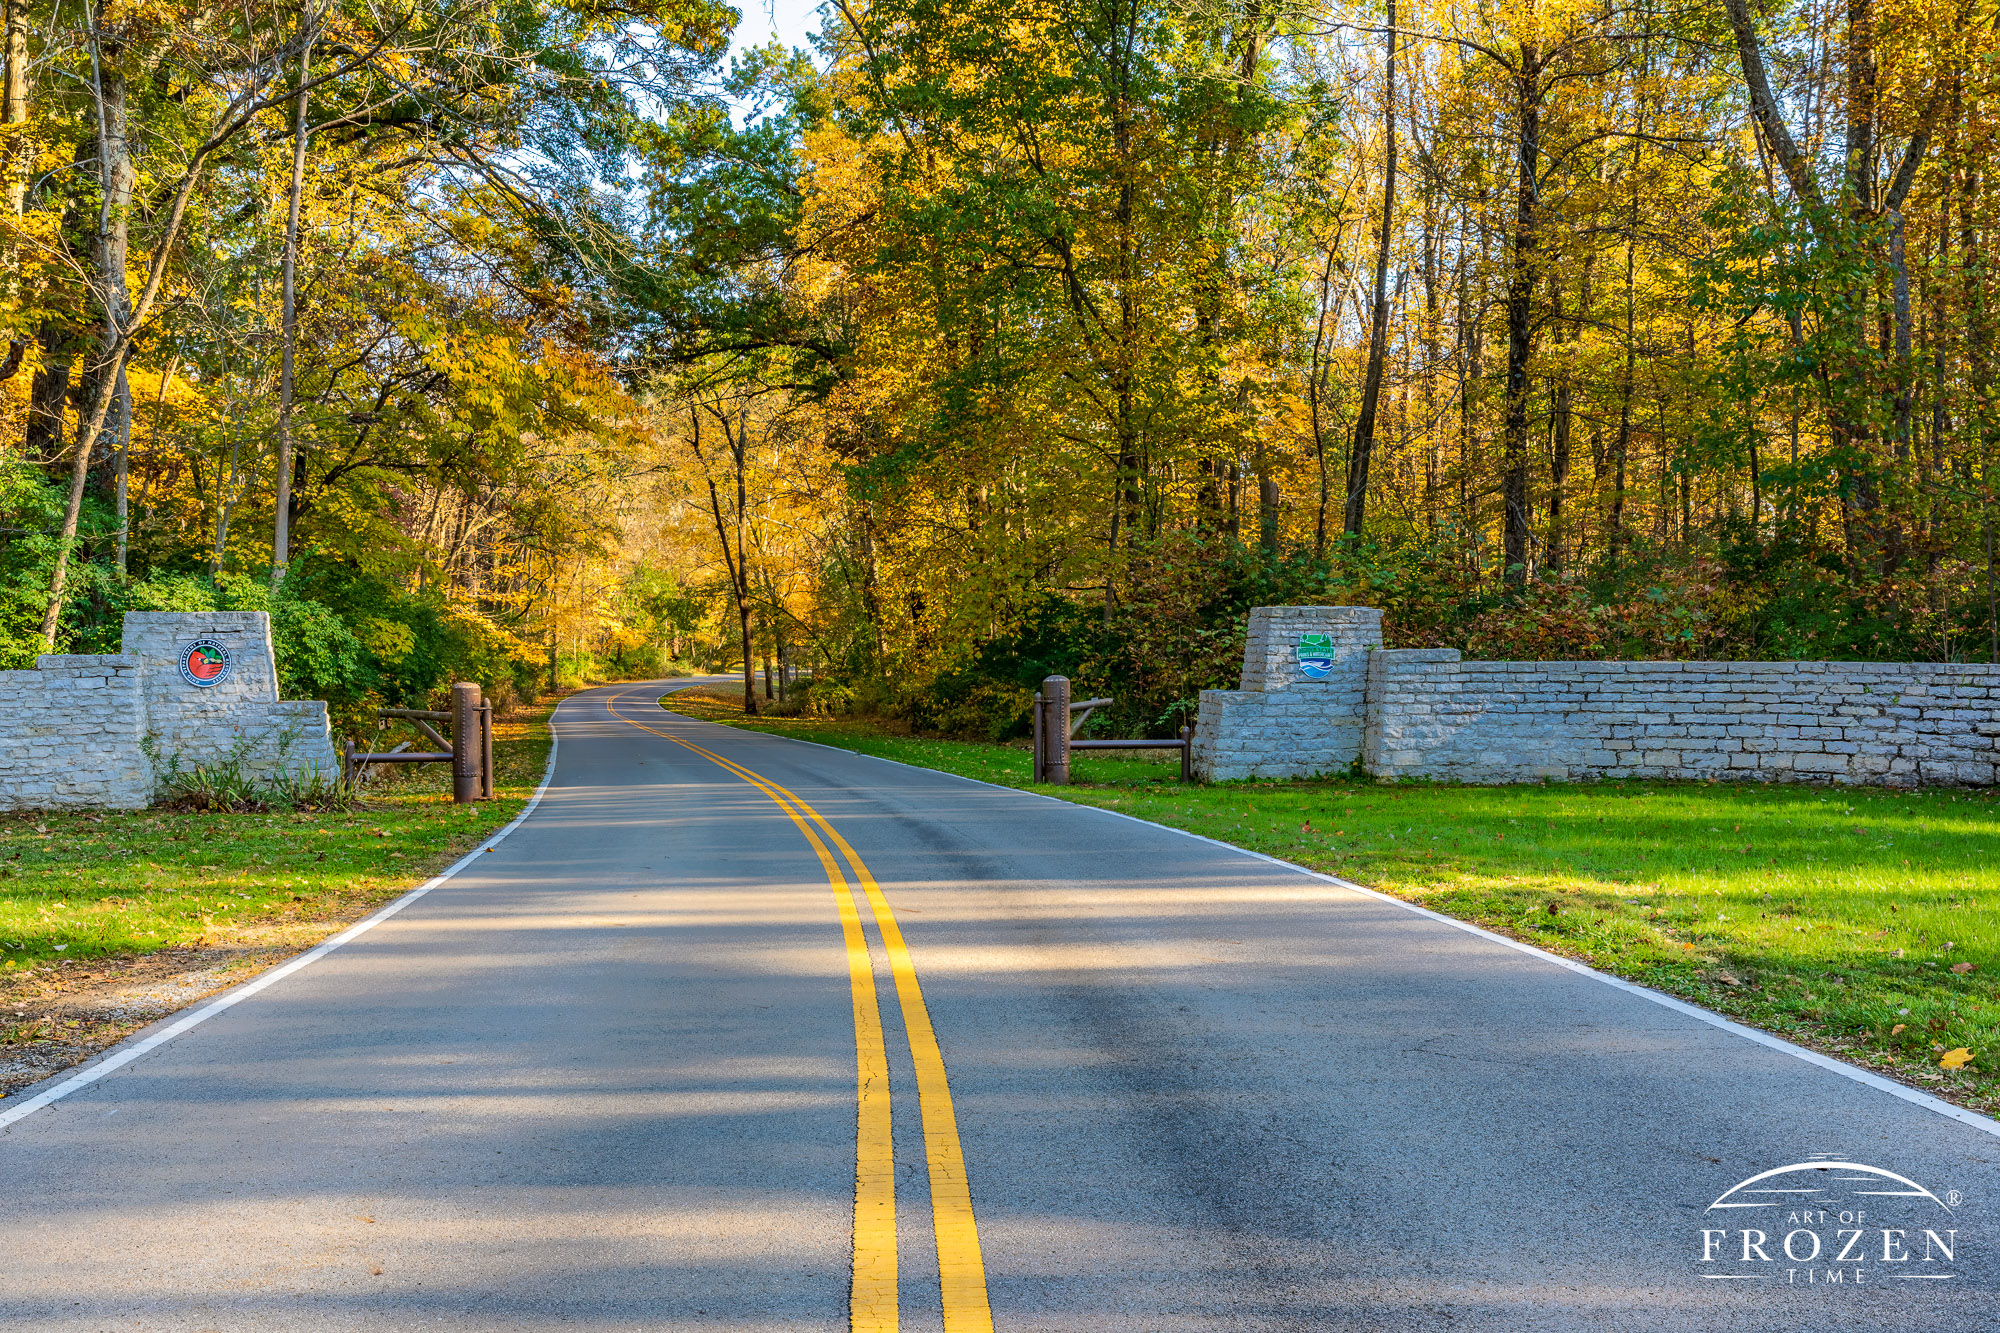 The road to John Bryan State Park extends into the distance under yellow sugar maple leaves as it passes by the stone entrance